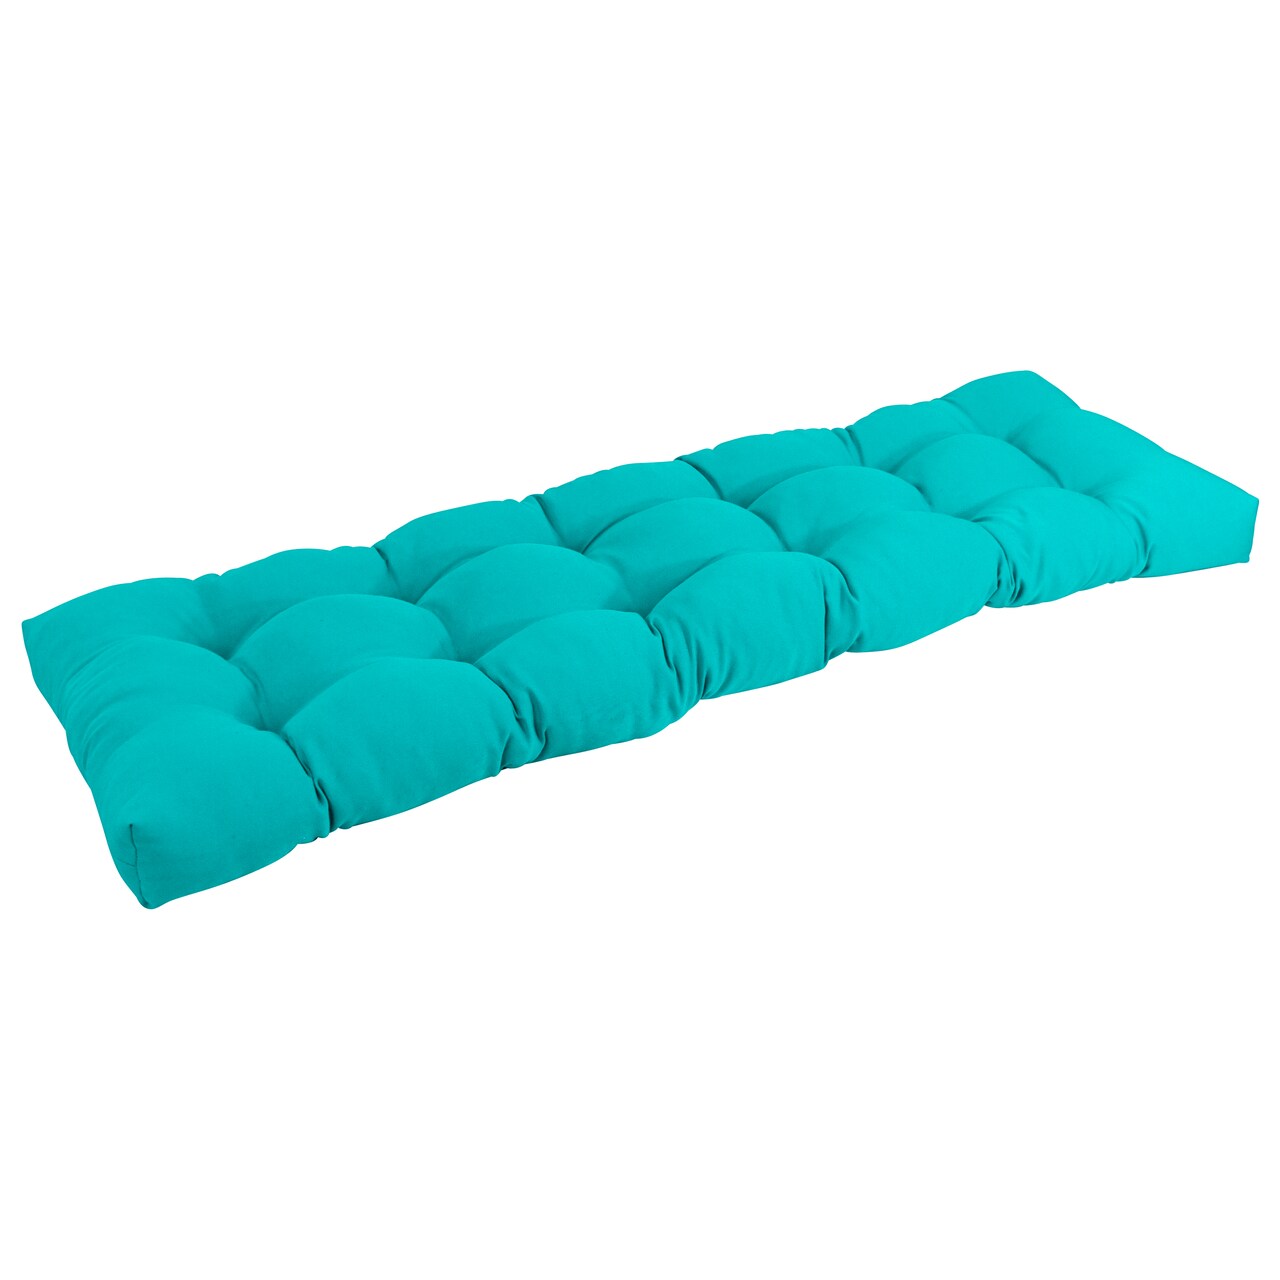 60-inch by 19-inch Tufted Solid Twill Bench Cushion Blue-Color